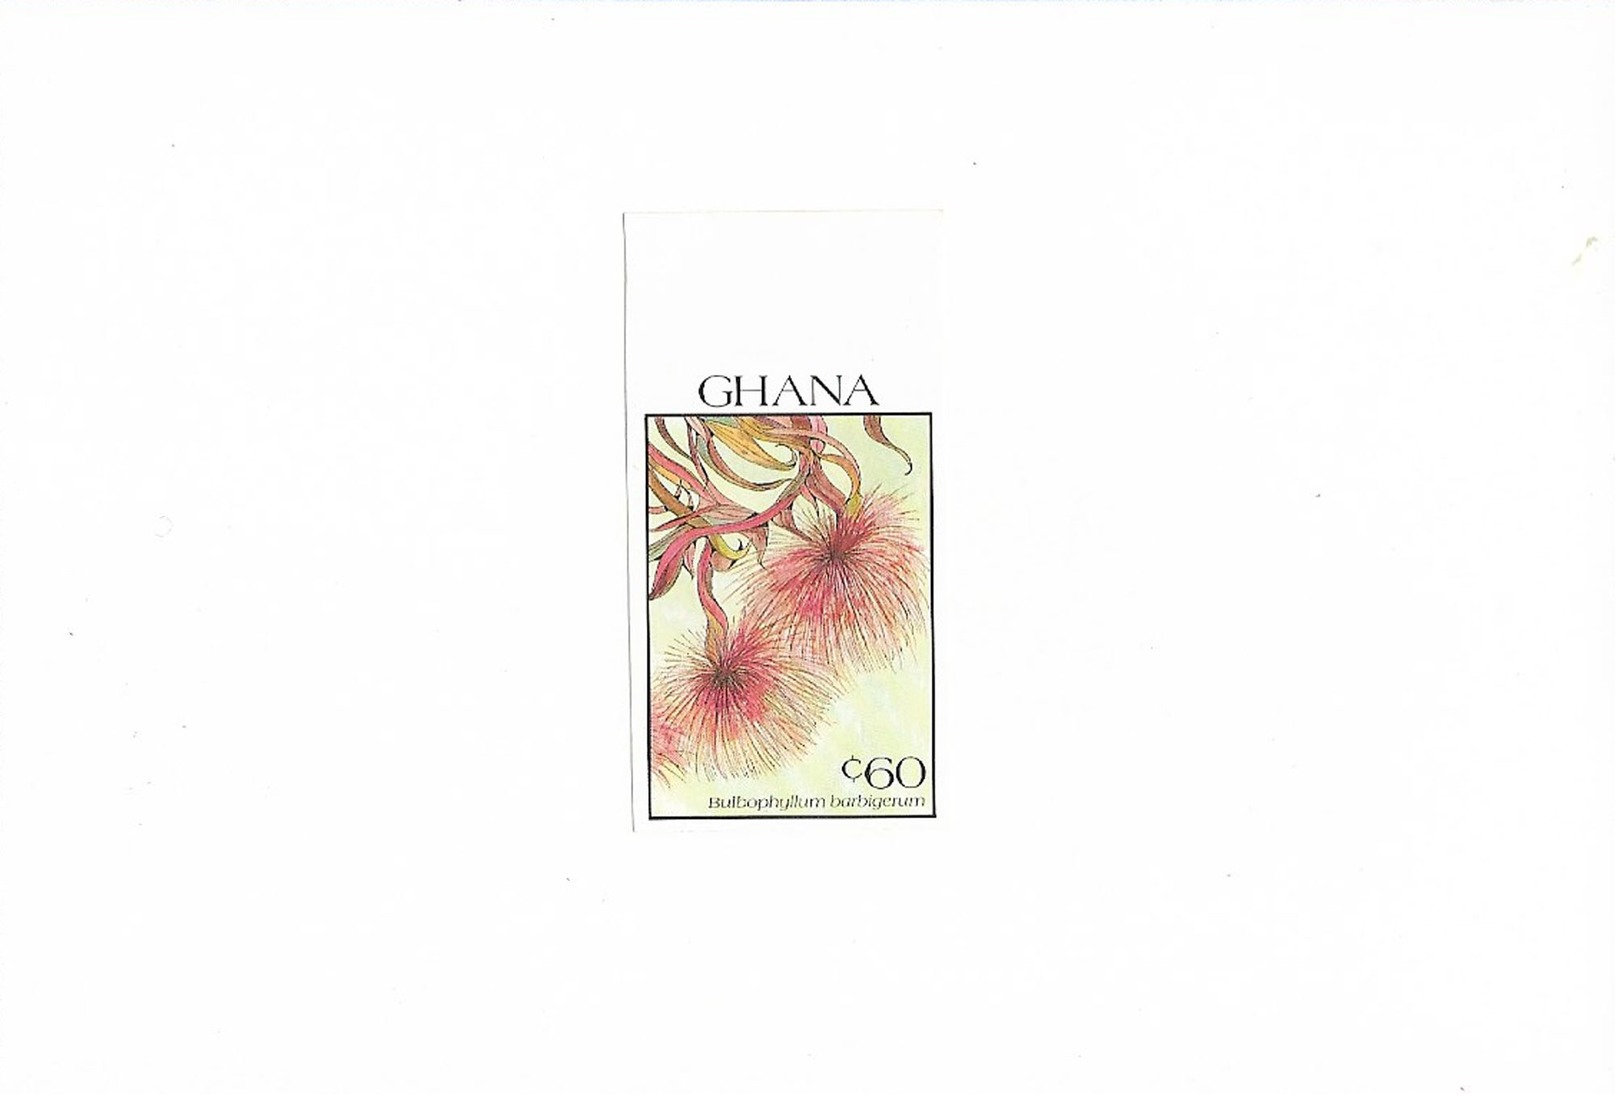 Ref 4 - Ghana 1990 MNH Plants Flowers Orchids Fleurs Orchidées Blumen - Proofs Imperforated Stamps Mounted On Card - Orchids